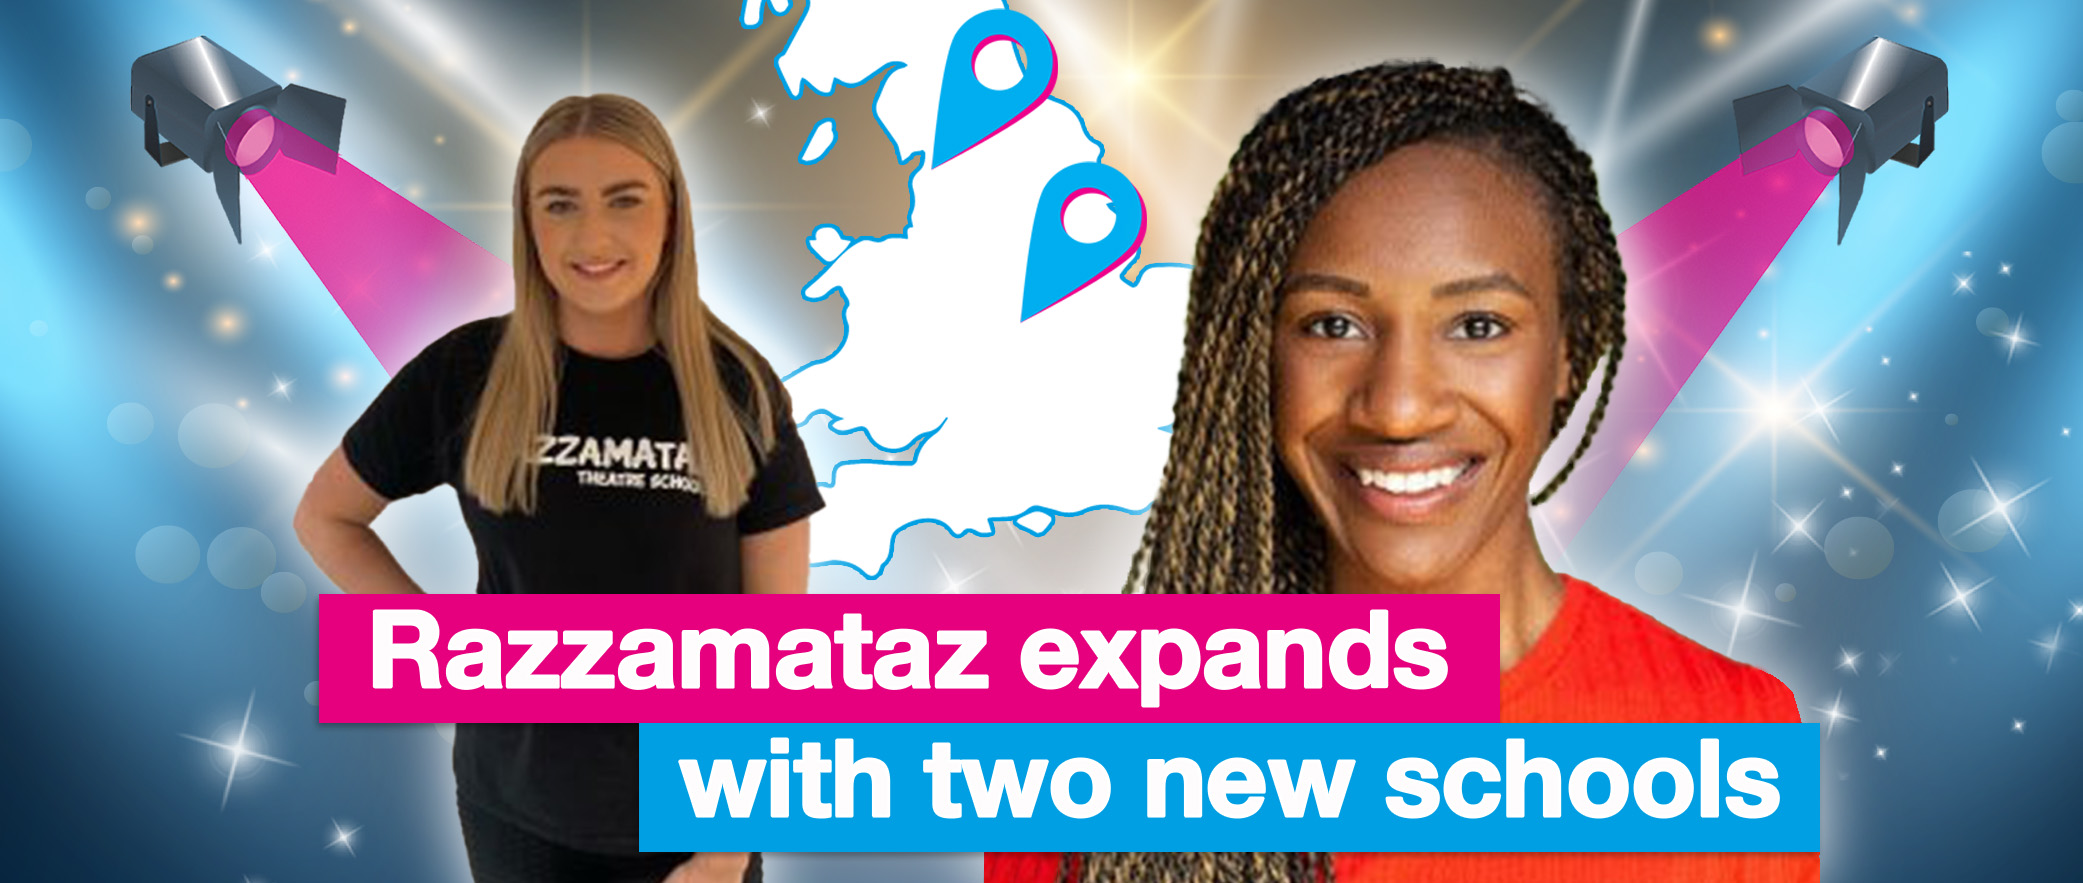 Razzamataz expands with two new schools